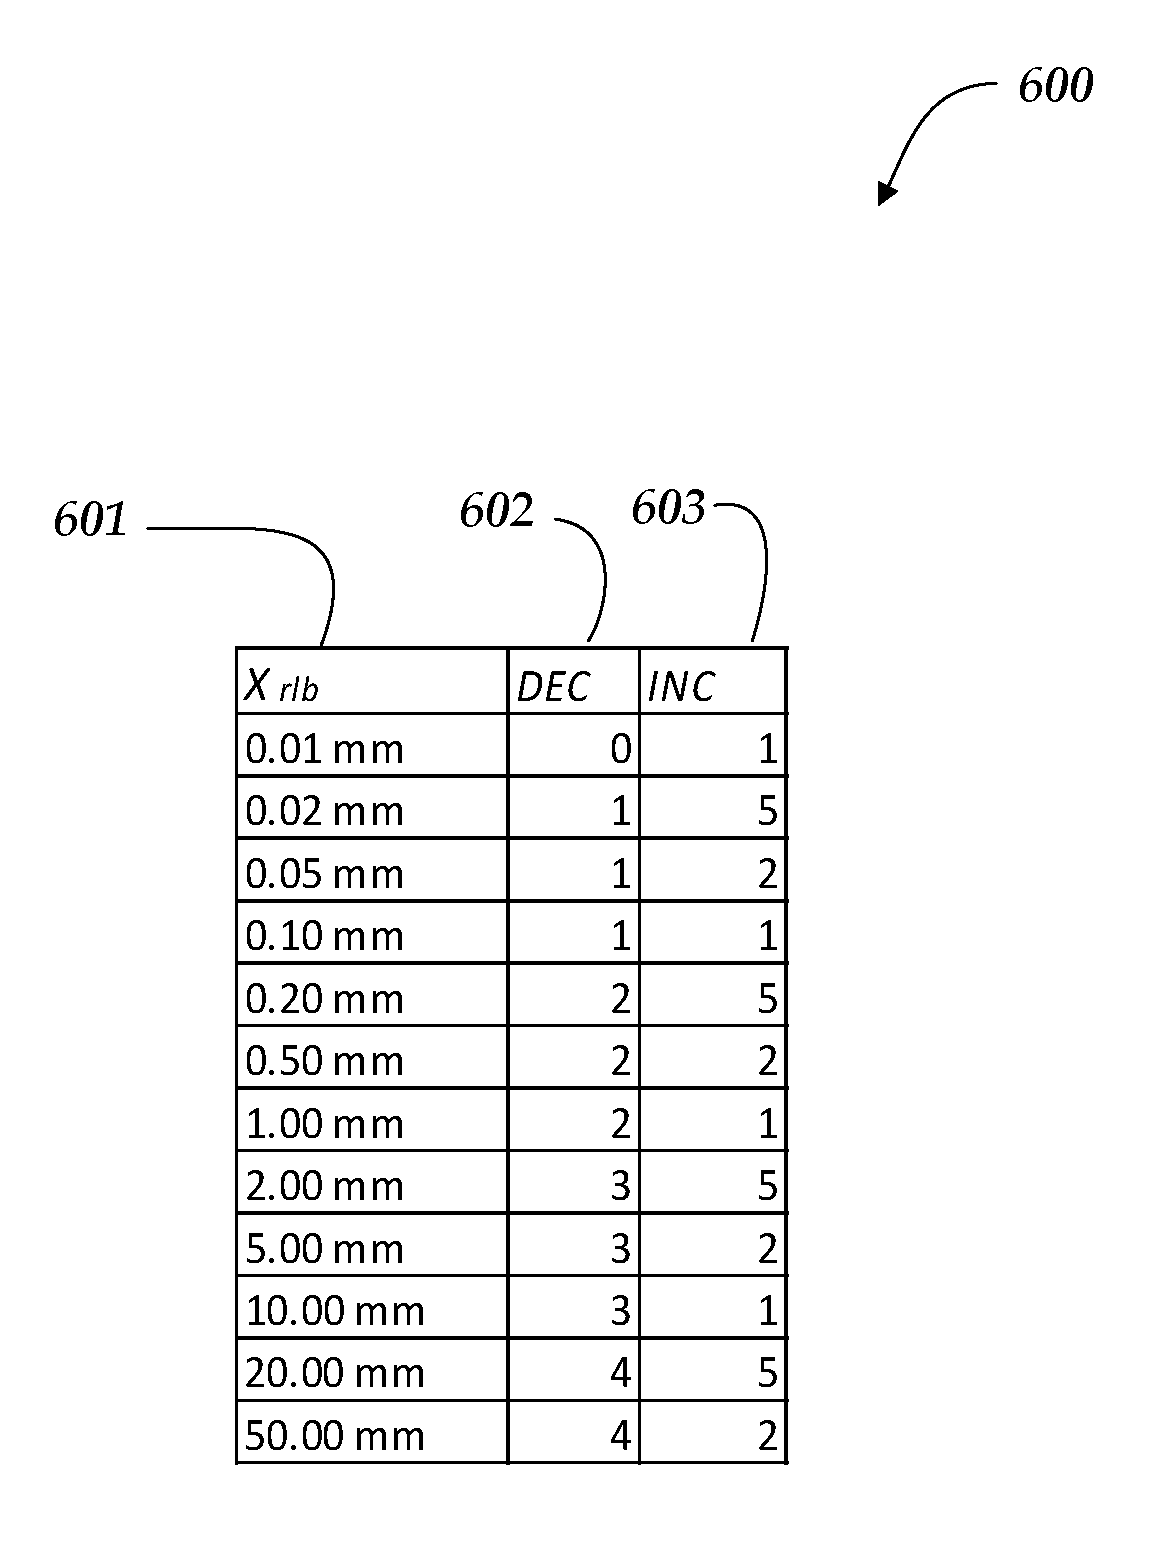 Display configuration for multimode electronic calipers having a ratiometric measurement mode